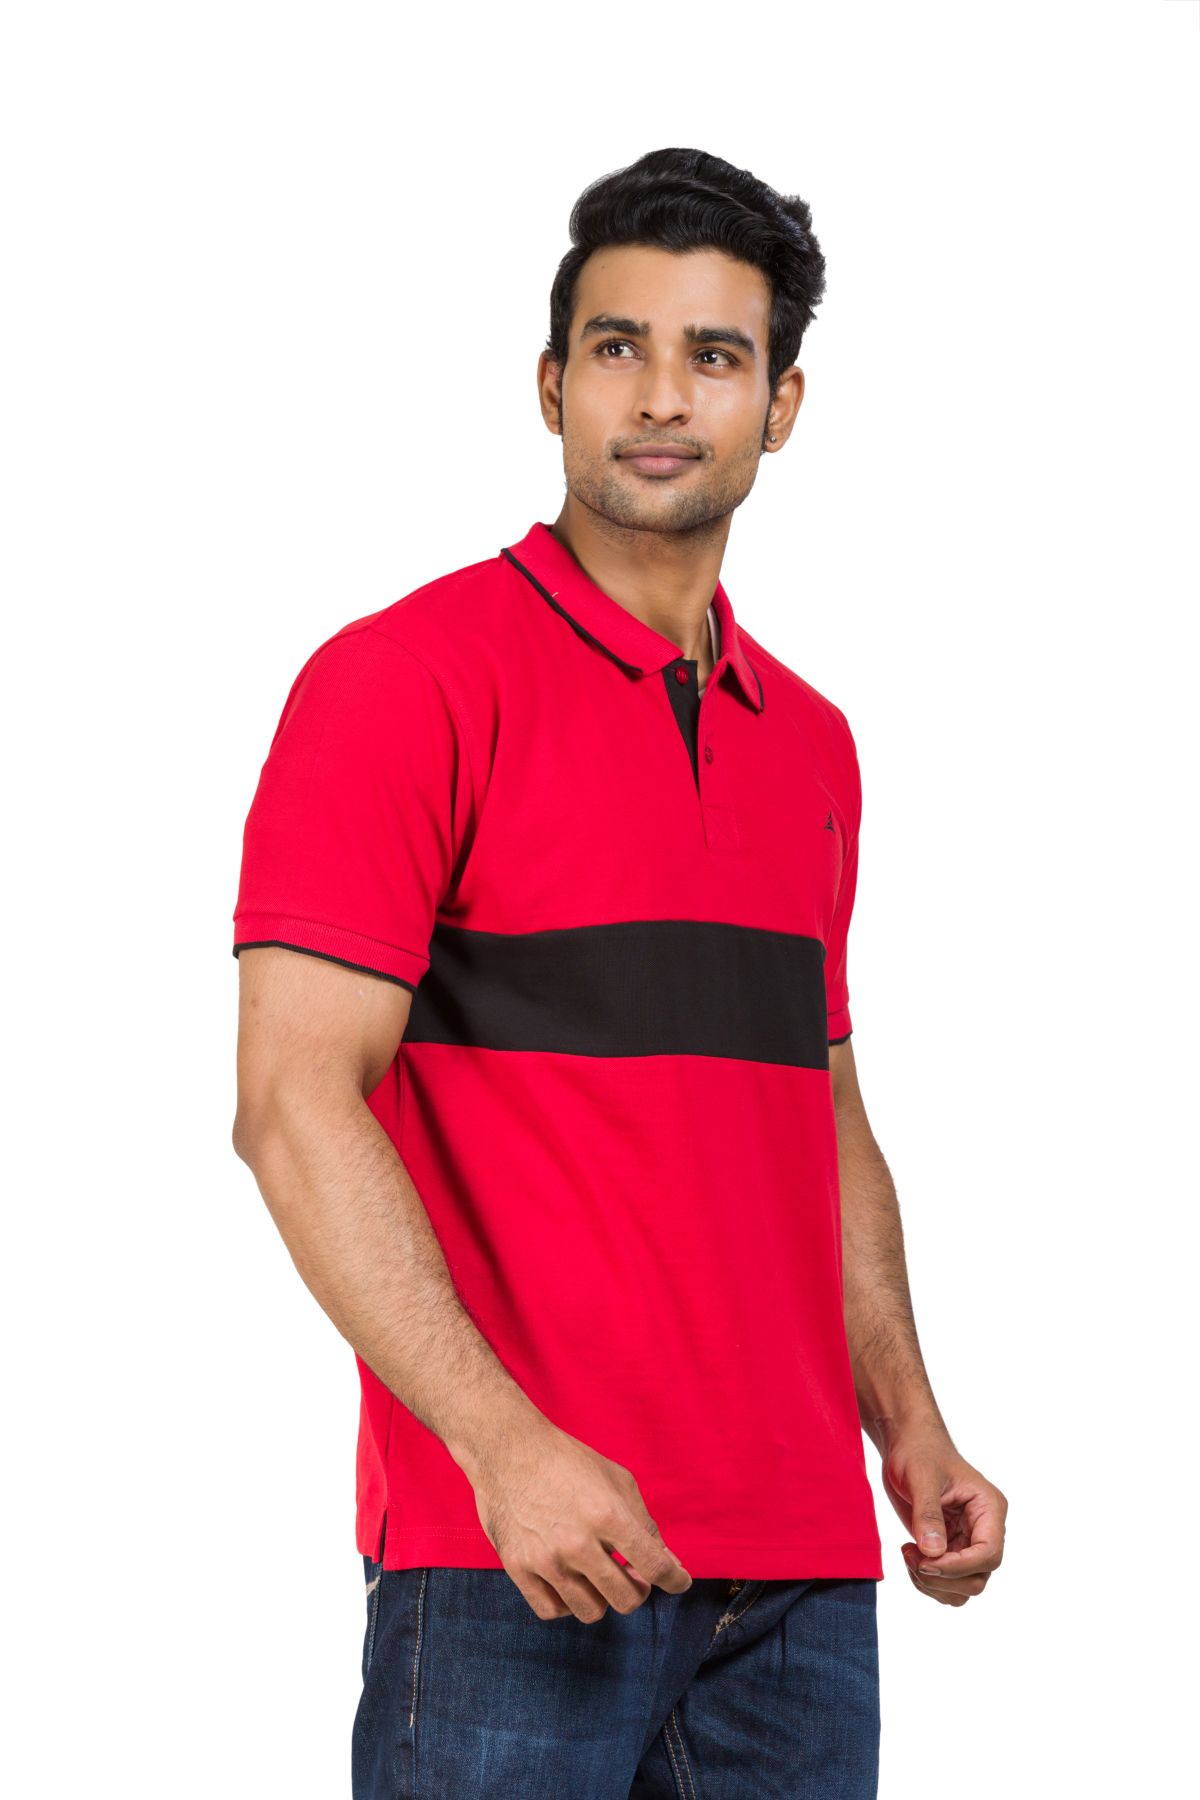 Cotton Blend Polo T-shirt Red-Black For Men